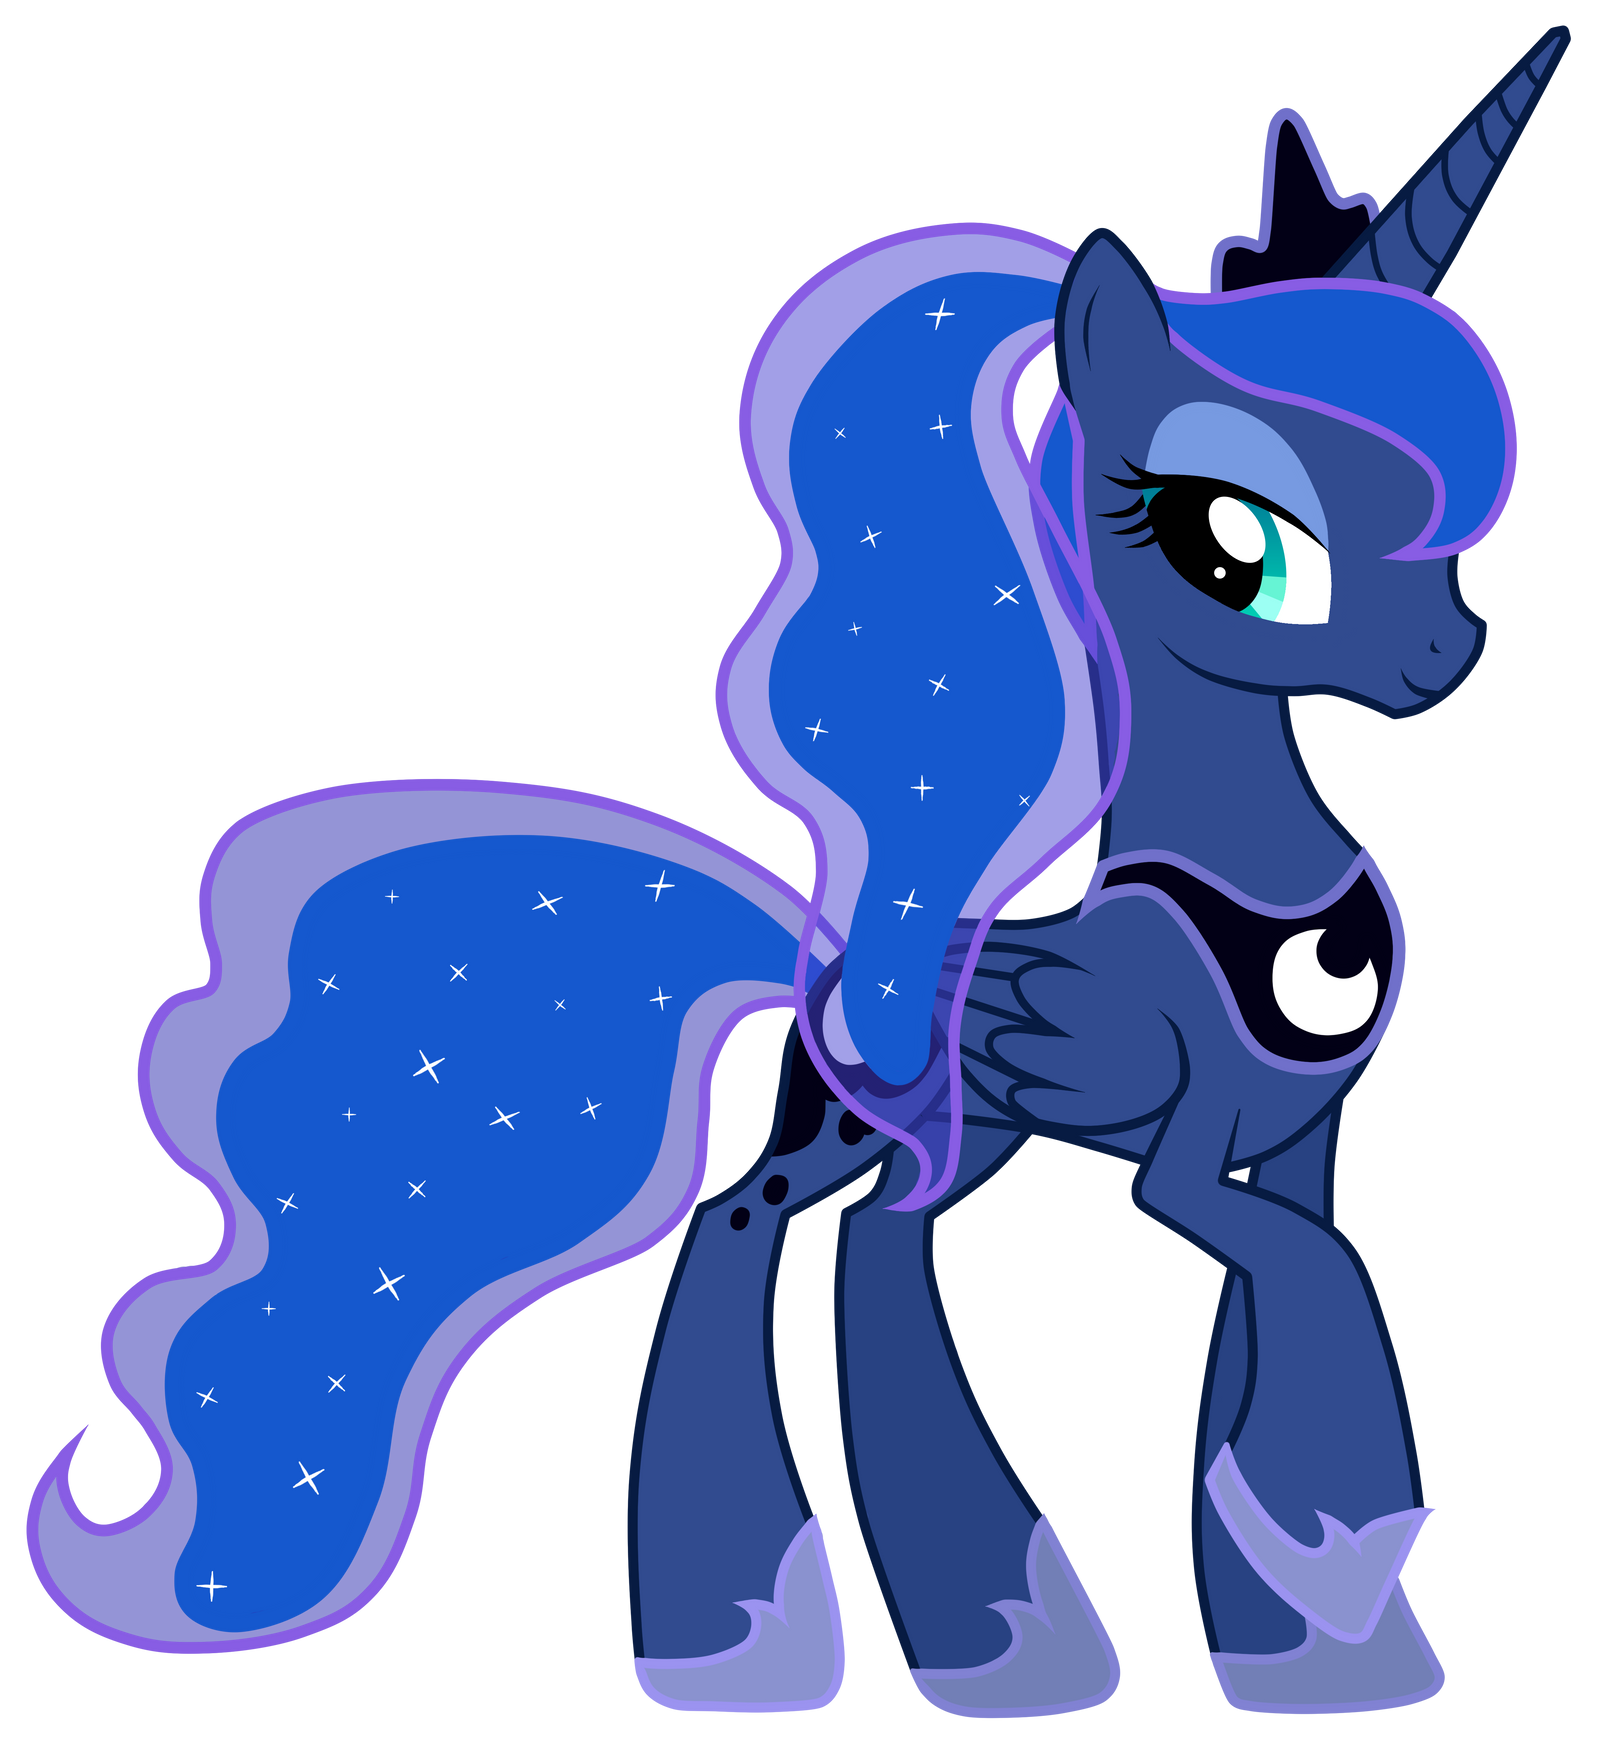 luna_with_a_ponytail_by_jennieoo-d52dg5h